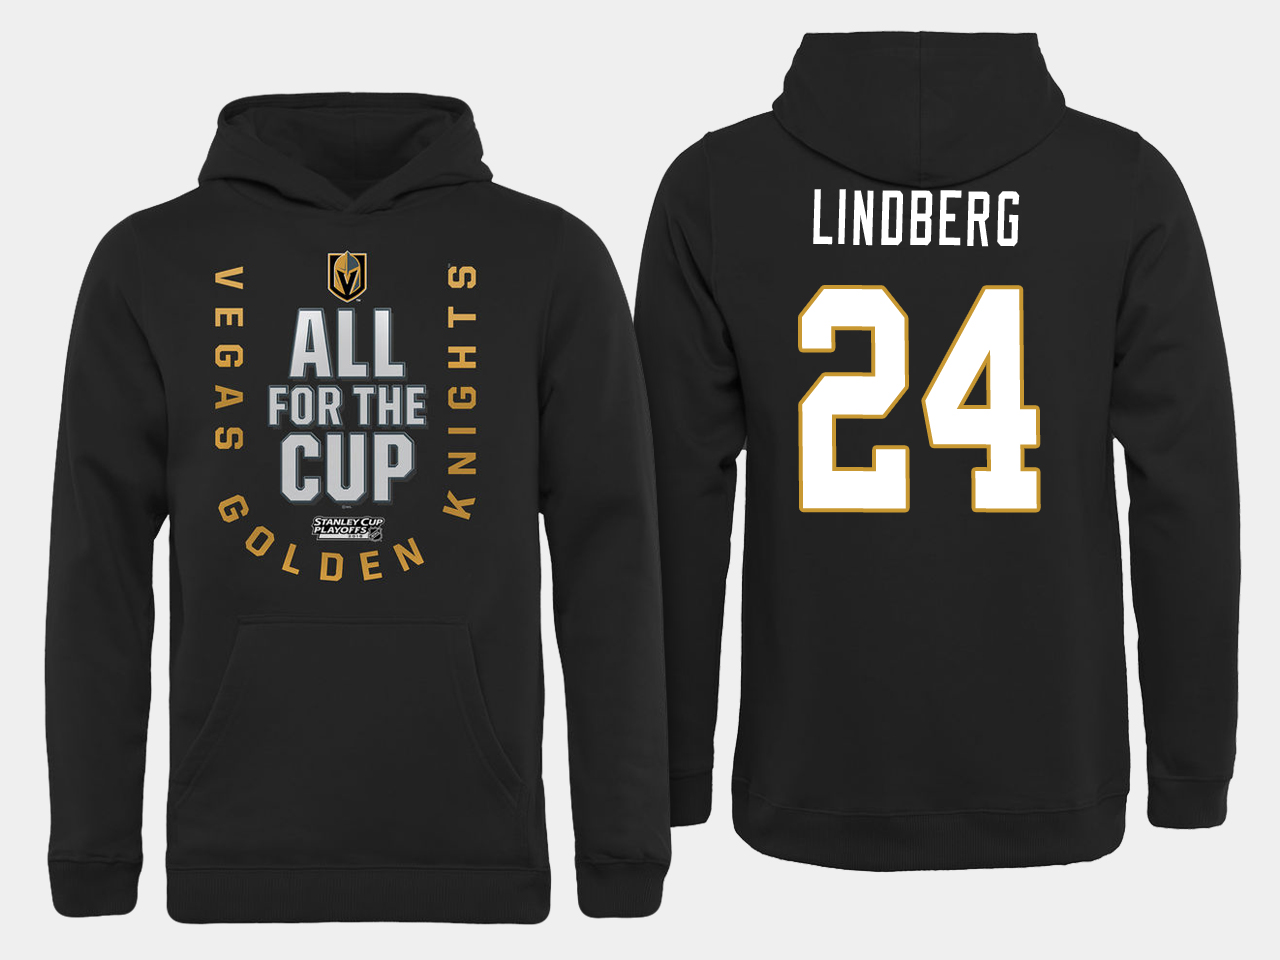 Men NHL Vegas Golden Knights 24 Lindberg All for the Cup hoodie